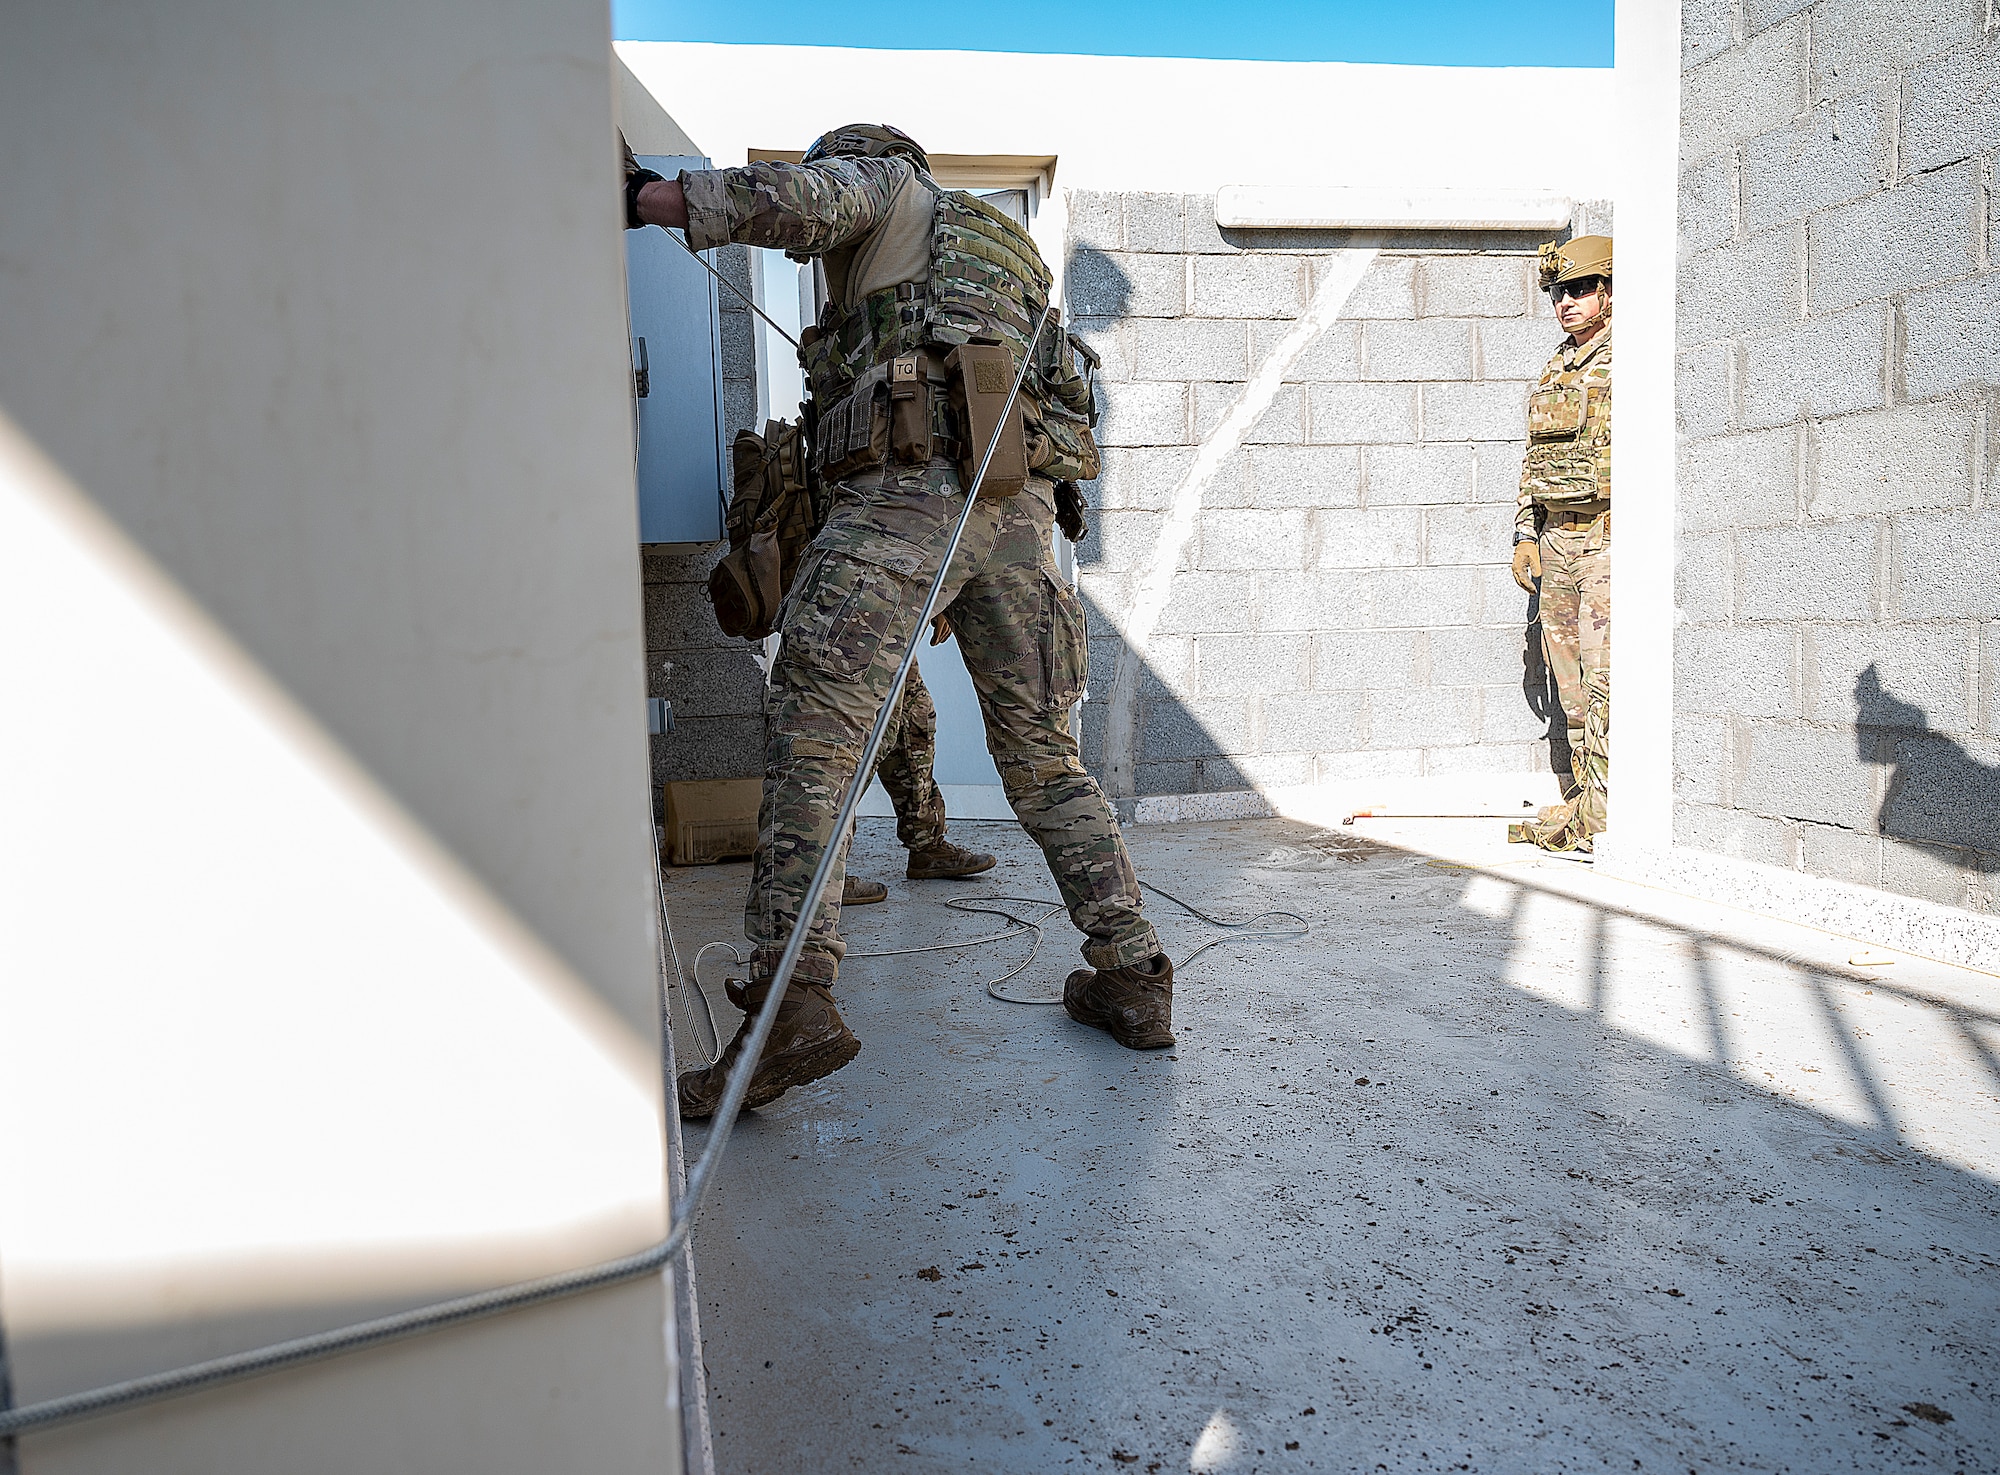 U.S. Air Force Staff Sgt. Ryan Melody, 380th Expeditionary Civil Engineer Squadron explosive ordnance disposal (EOD) technician pulls a wire during a simulated explosive removal training at Al Dhafra Air Base, United Arab Emirates, Jan. 28, 2021.